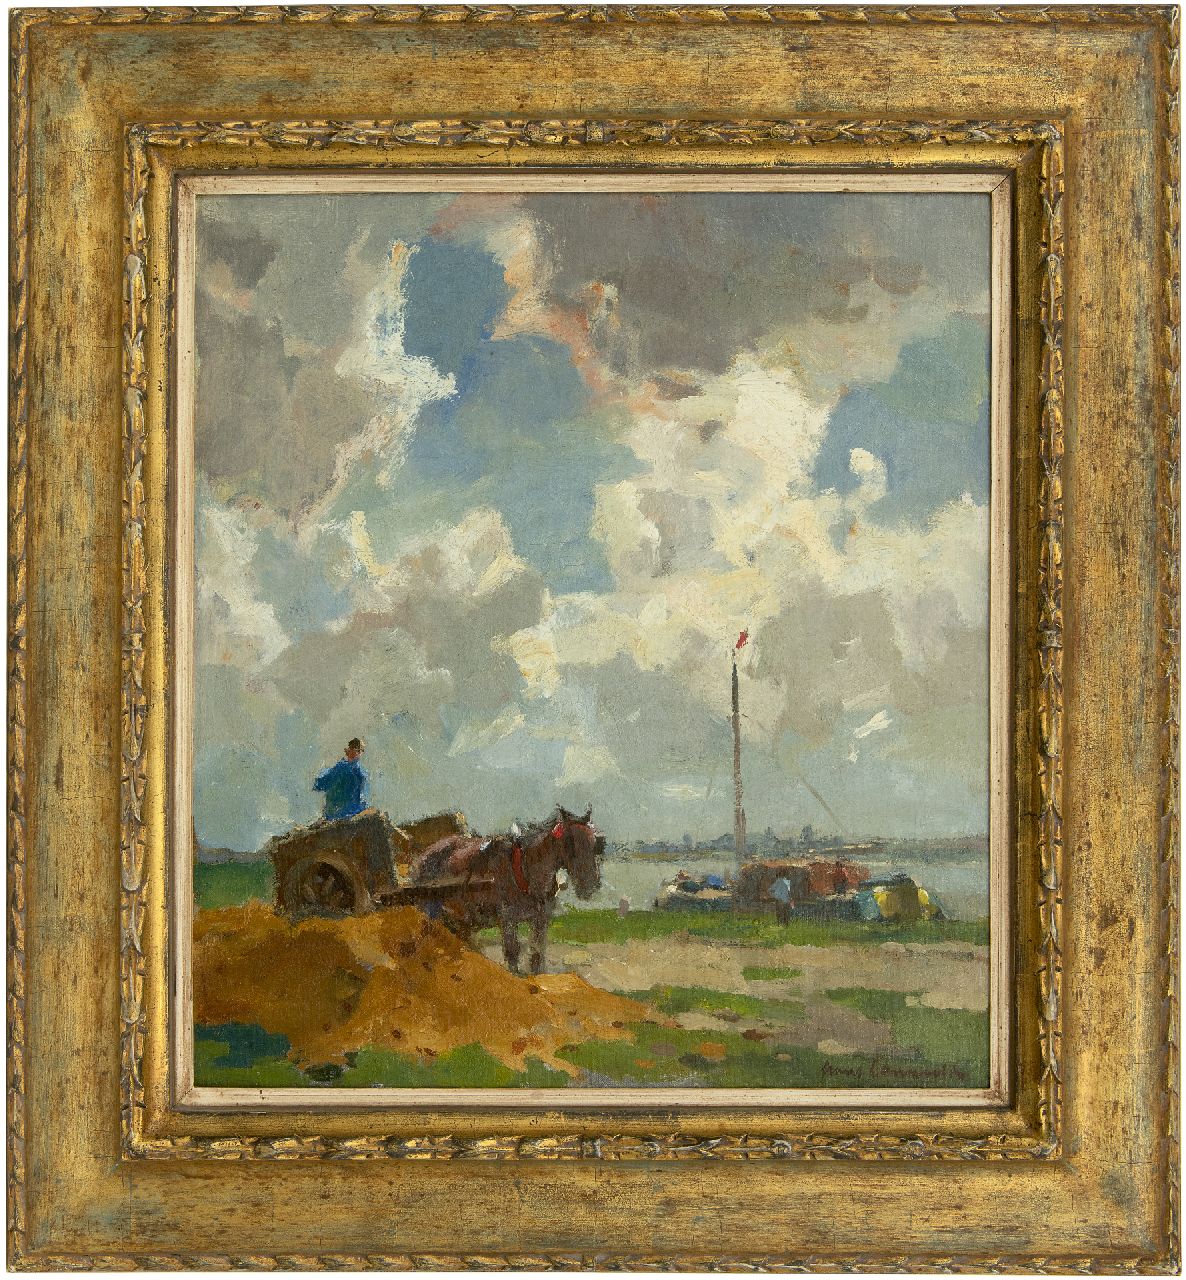 Langeveld F.A.  | Franciscus Arnoldus 'Frans' Langeveld | Paintings offered for sale | Sand digger along the river, oil on canvas 49.9 x 45.3 cm, signed l.r.